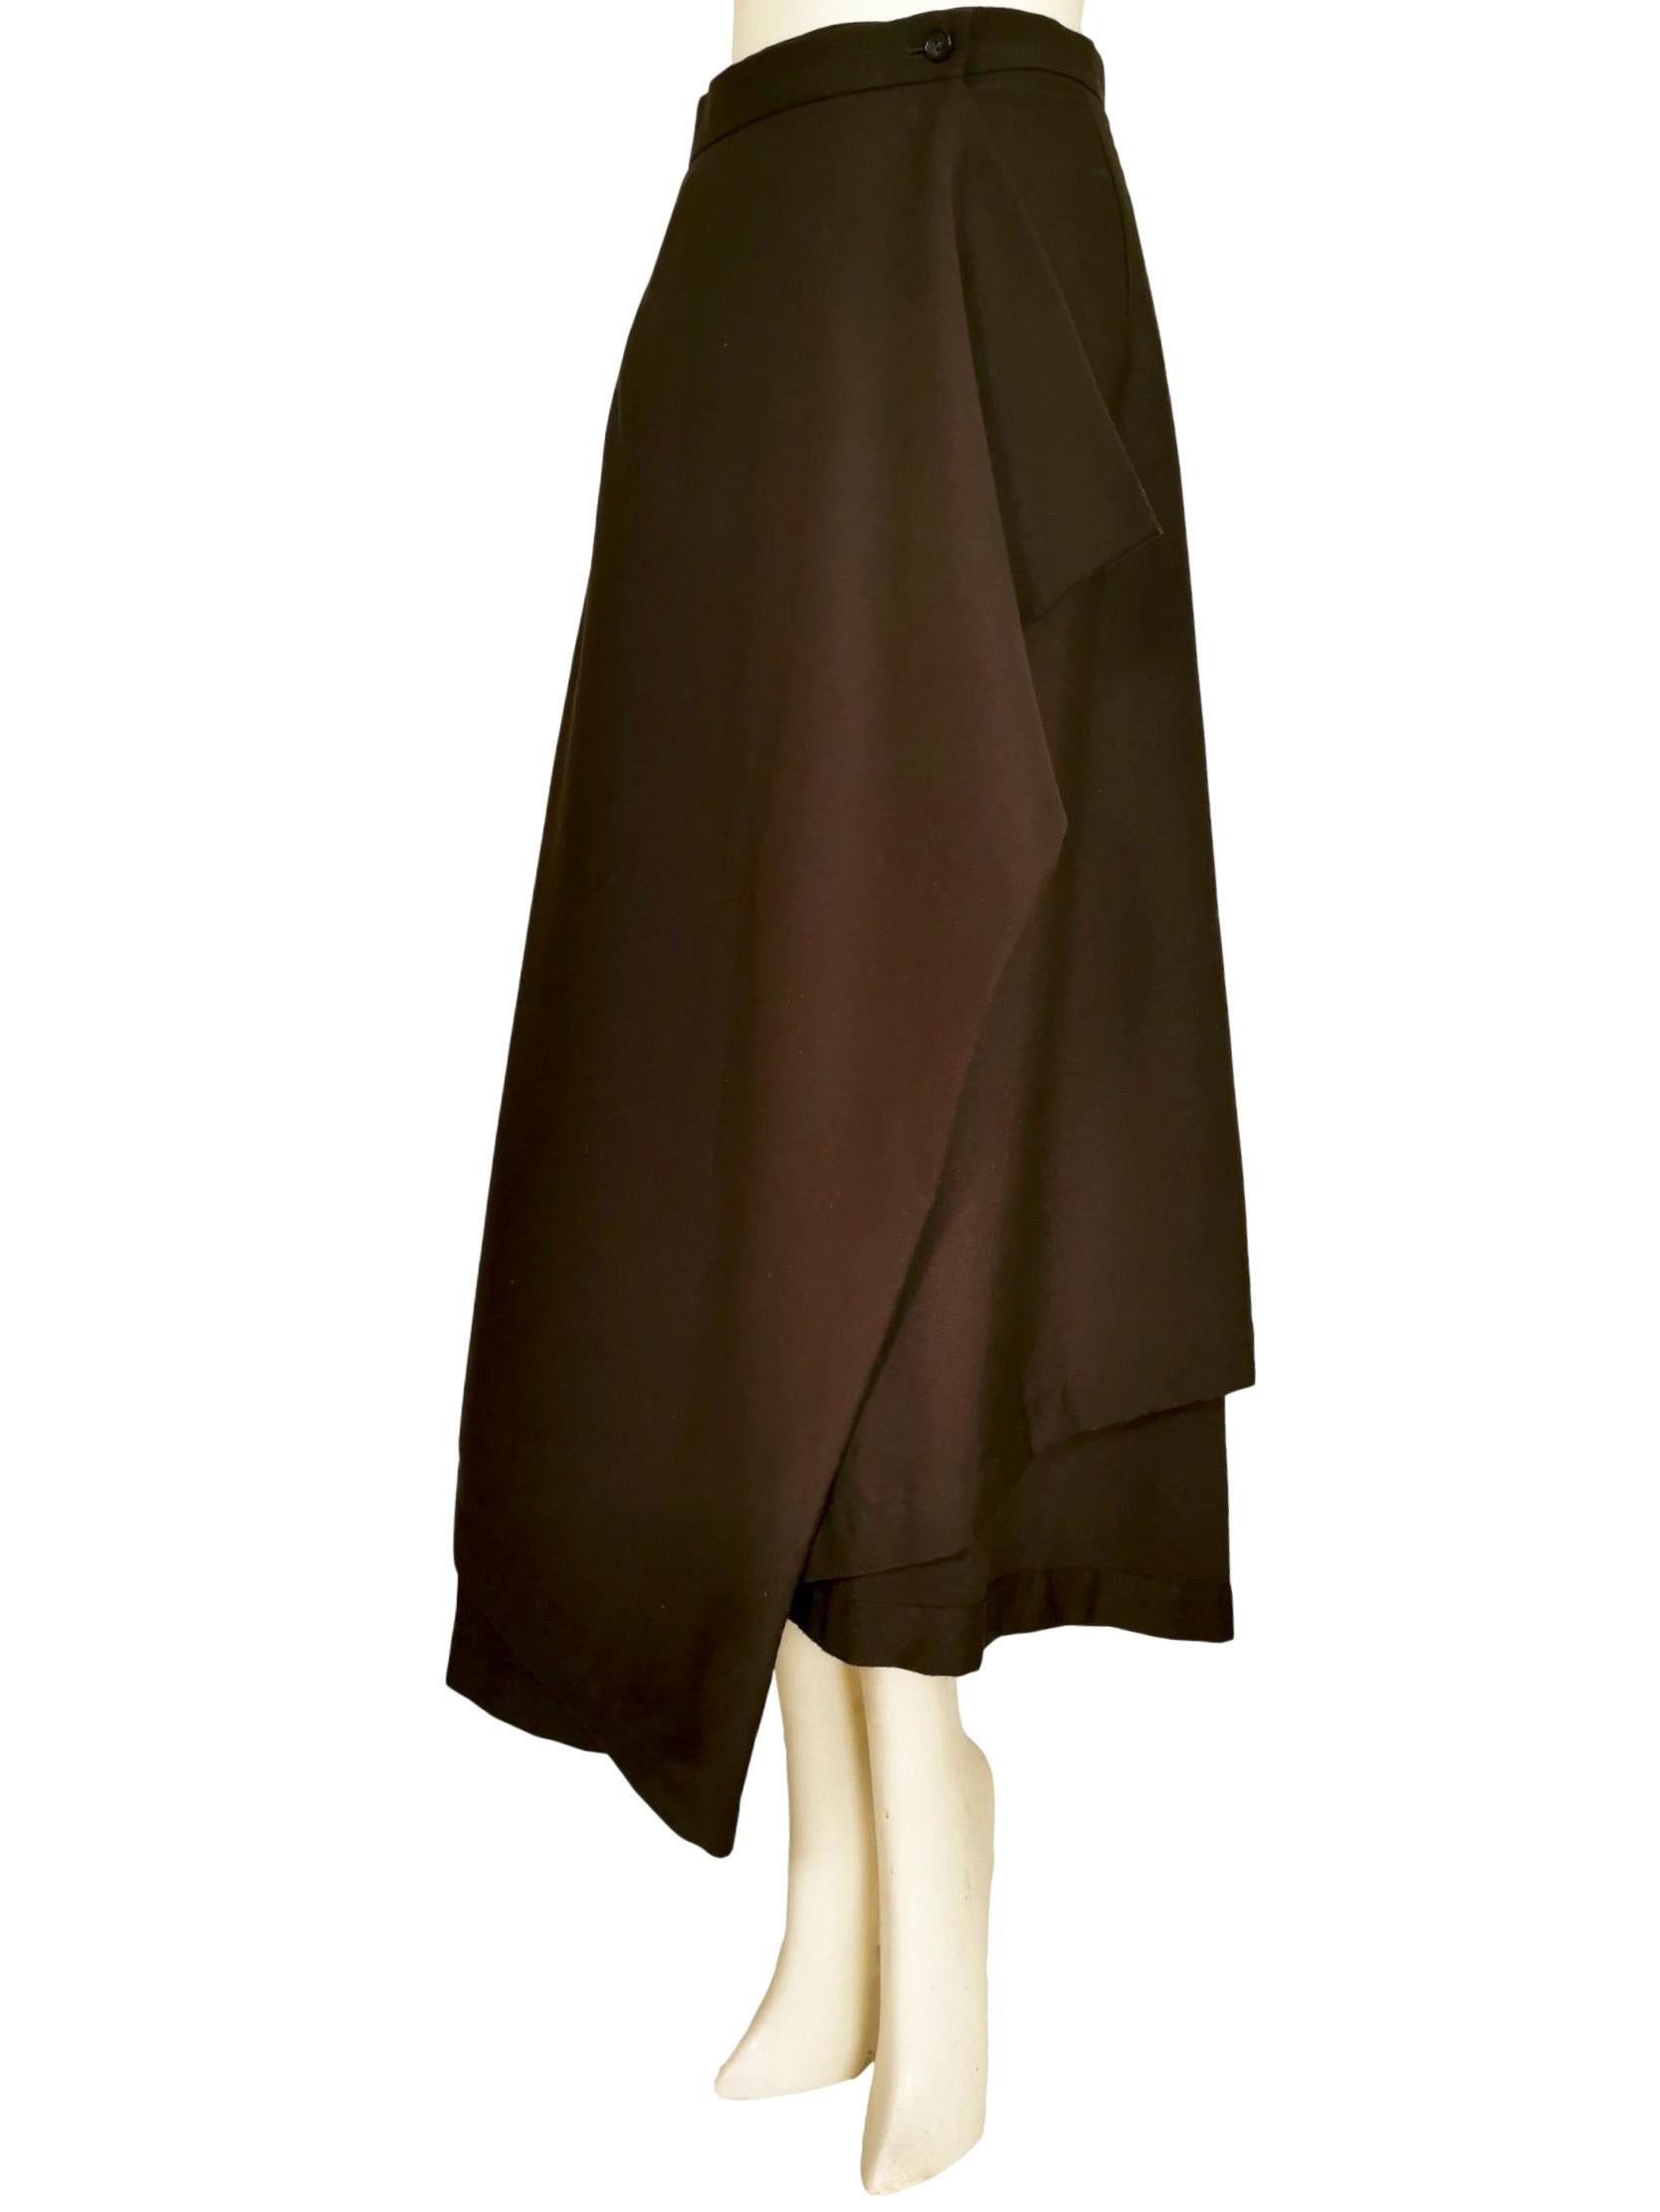 Black Comme des Garcons Wrap Around Skirt AD 1996 For Sale